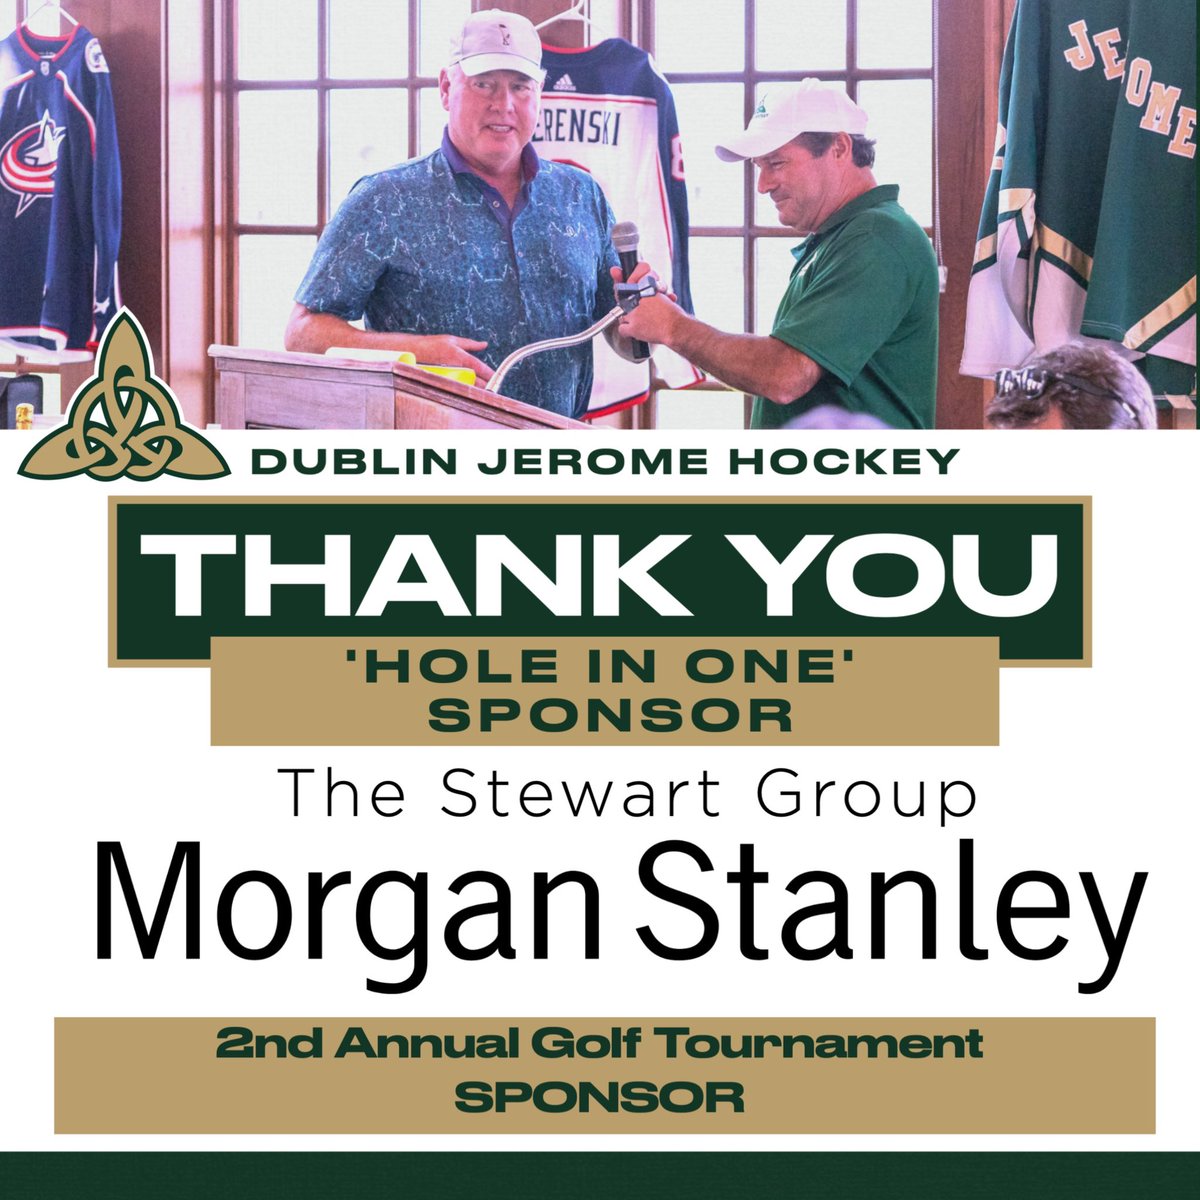 The Dublin Jerome Hockey community would like to thank our Hole in One Sponsor, The Stewart Group at Morgan Stanley!